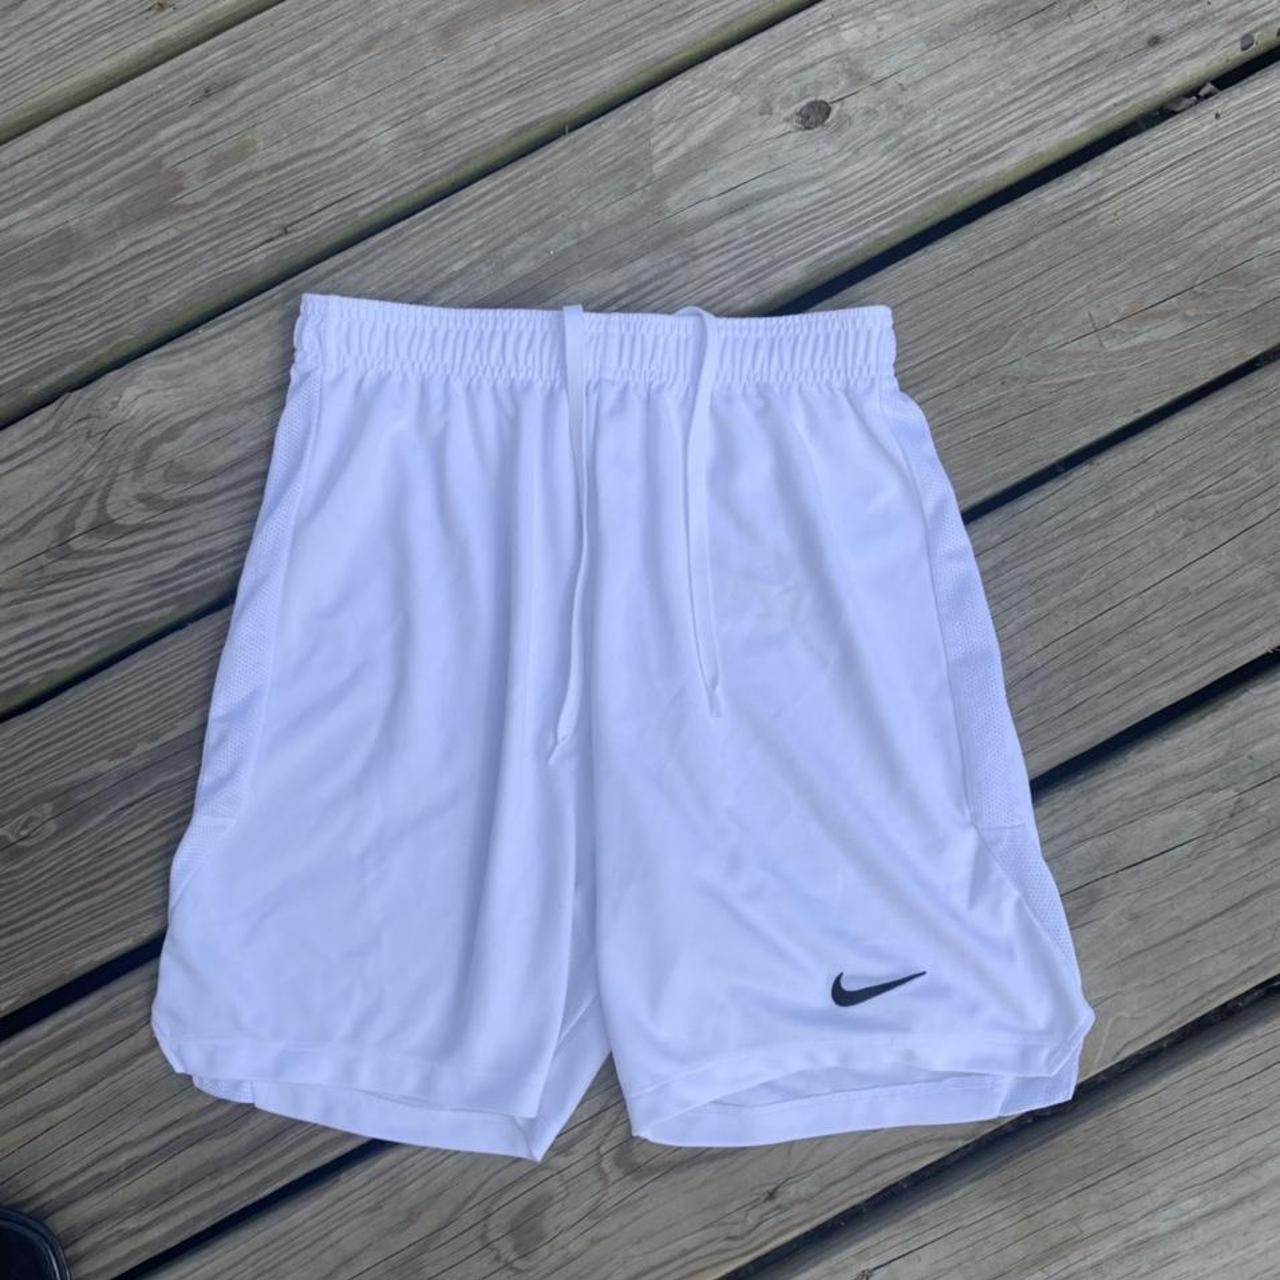 Late 90’s/early y2k Nike basketball shorts in great... - Depop